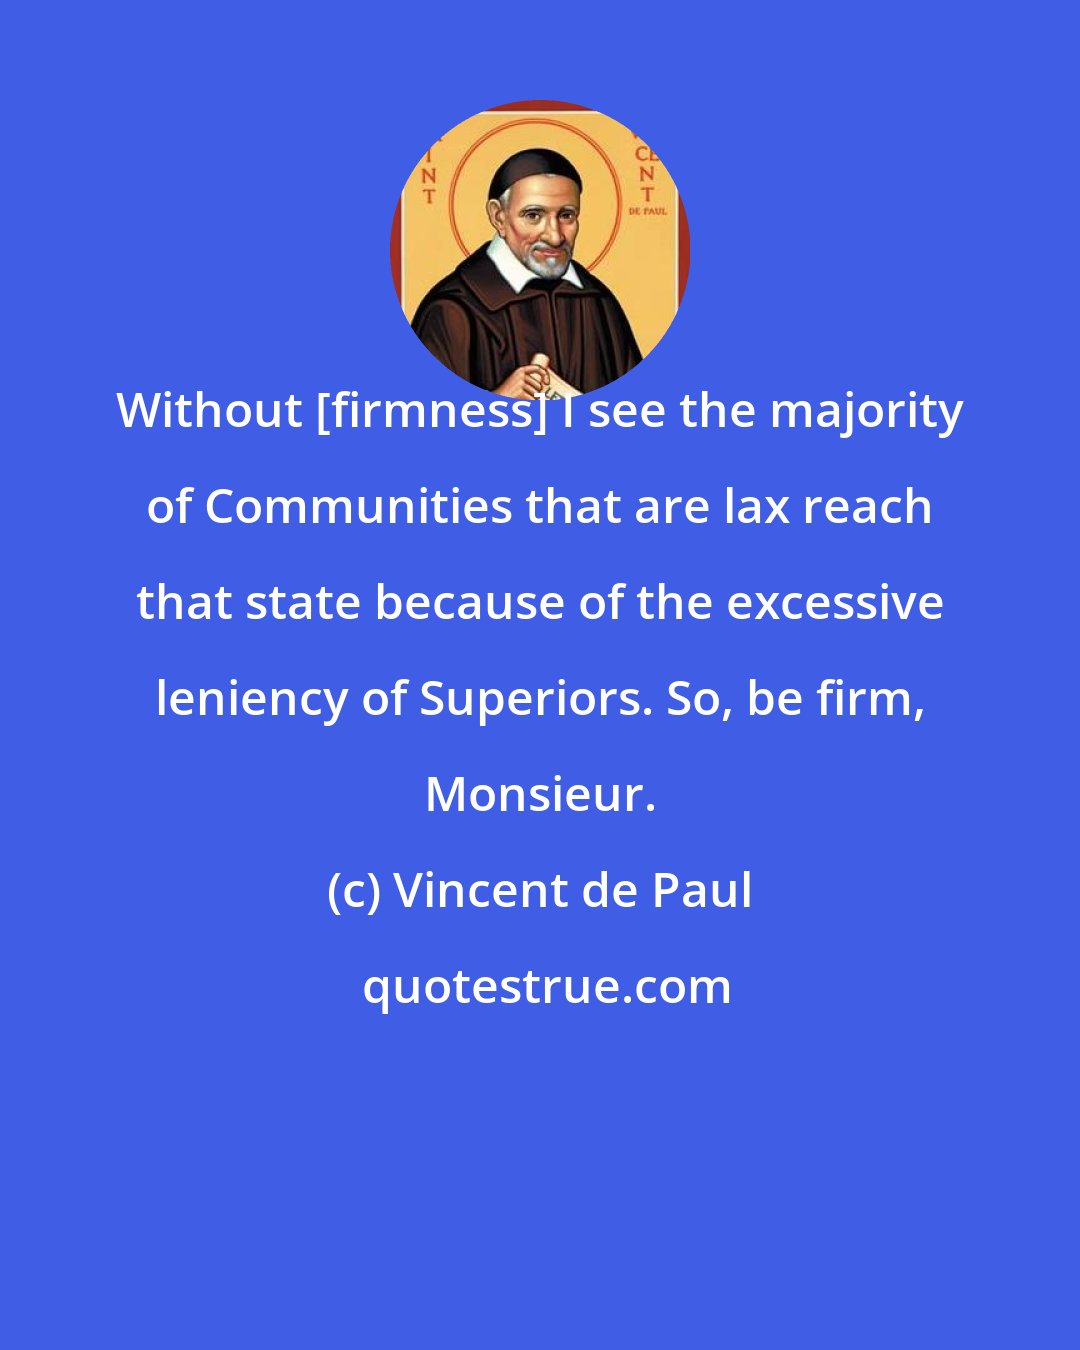 Vincent de Paul: Without [firmness] I see the majority of Communities that are lax reach that state because of the excessive leniency of Superiors. So, be firm, Monsieur.